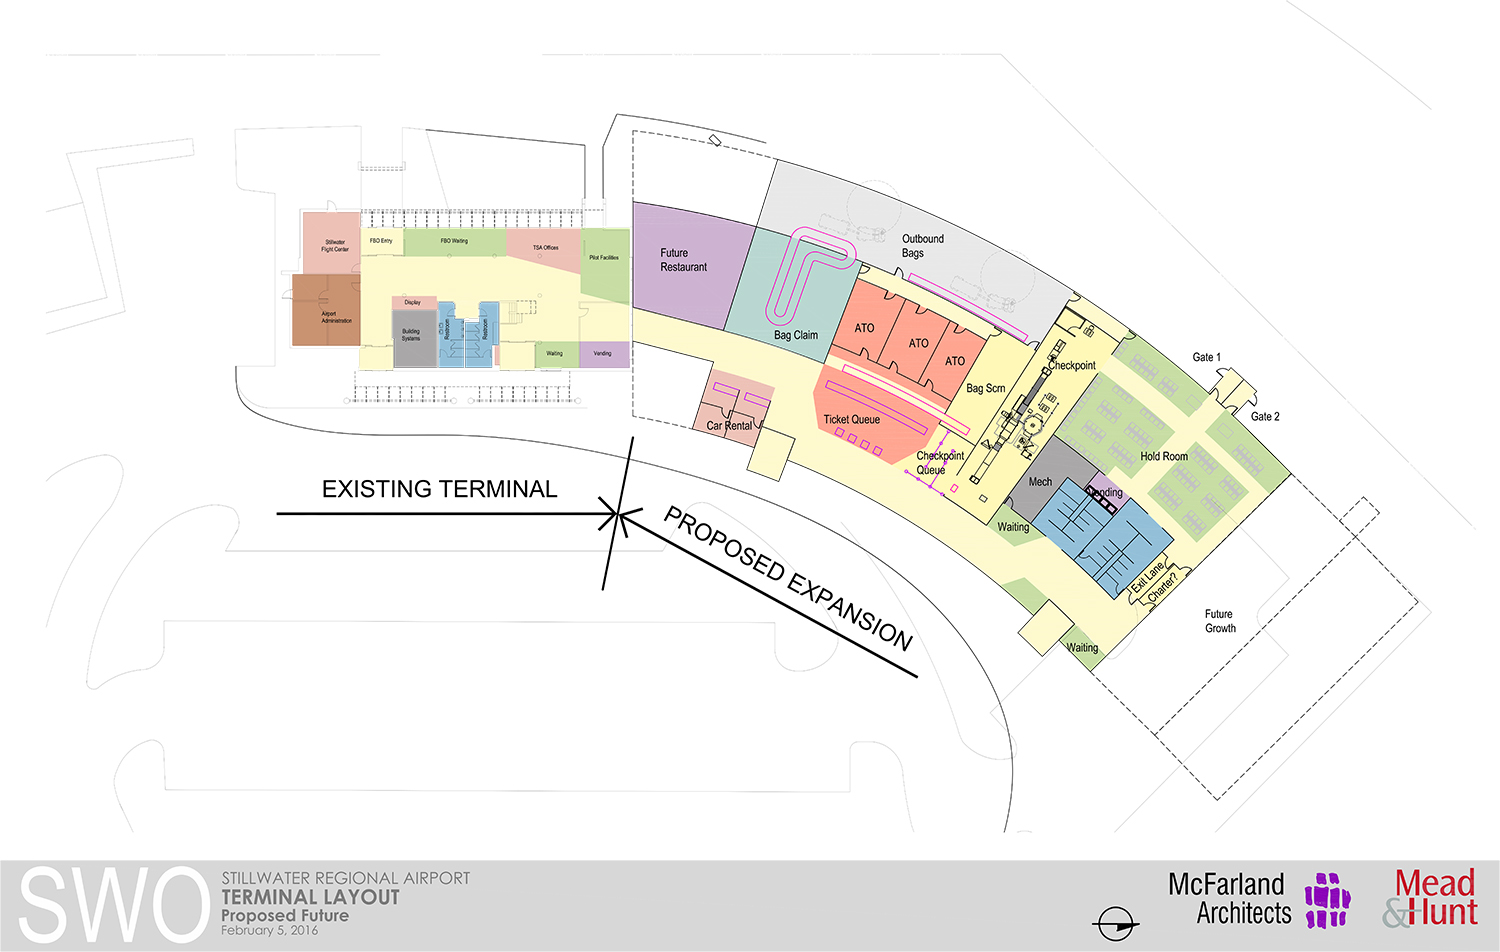 future expansion of Stillwater Regional Airport's terminal